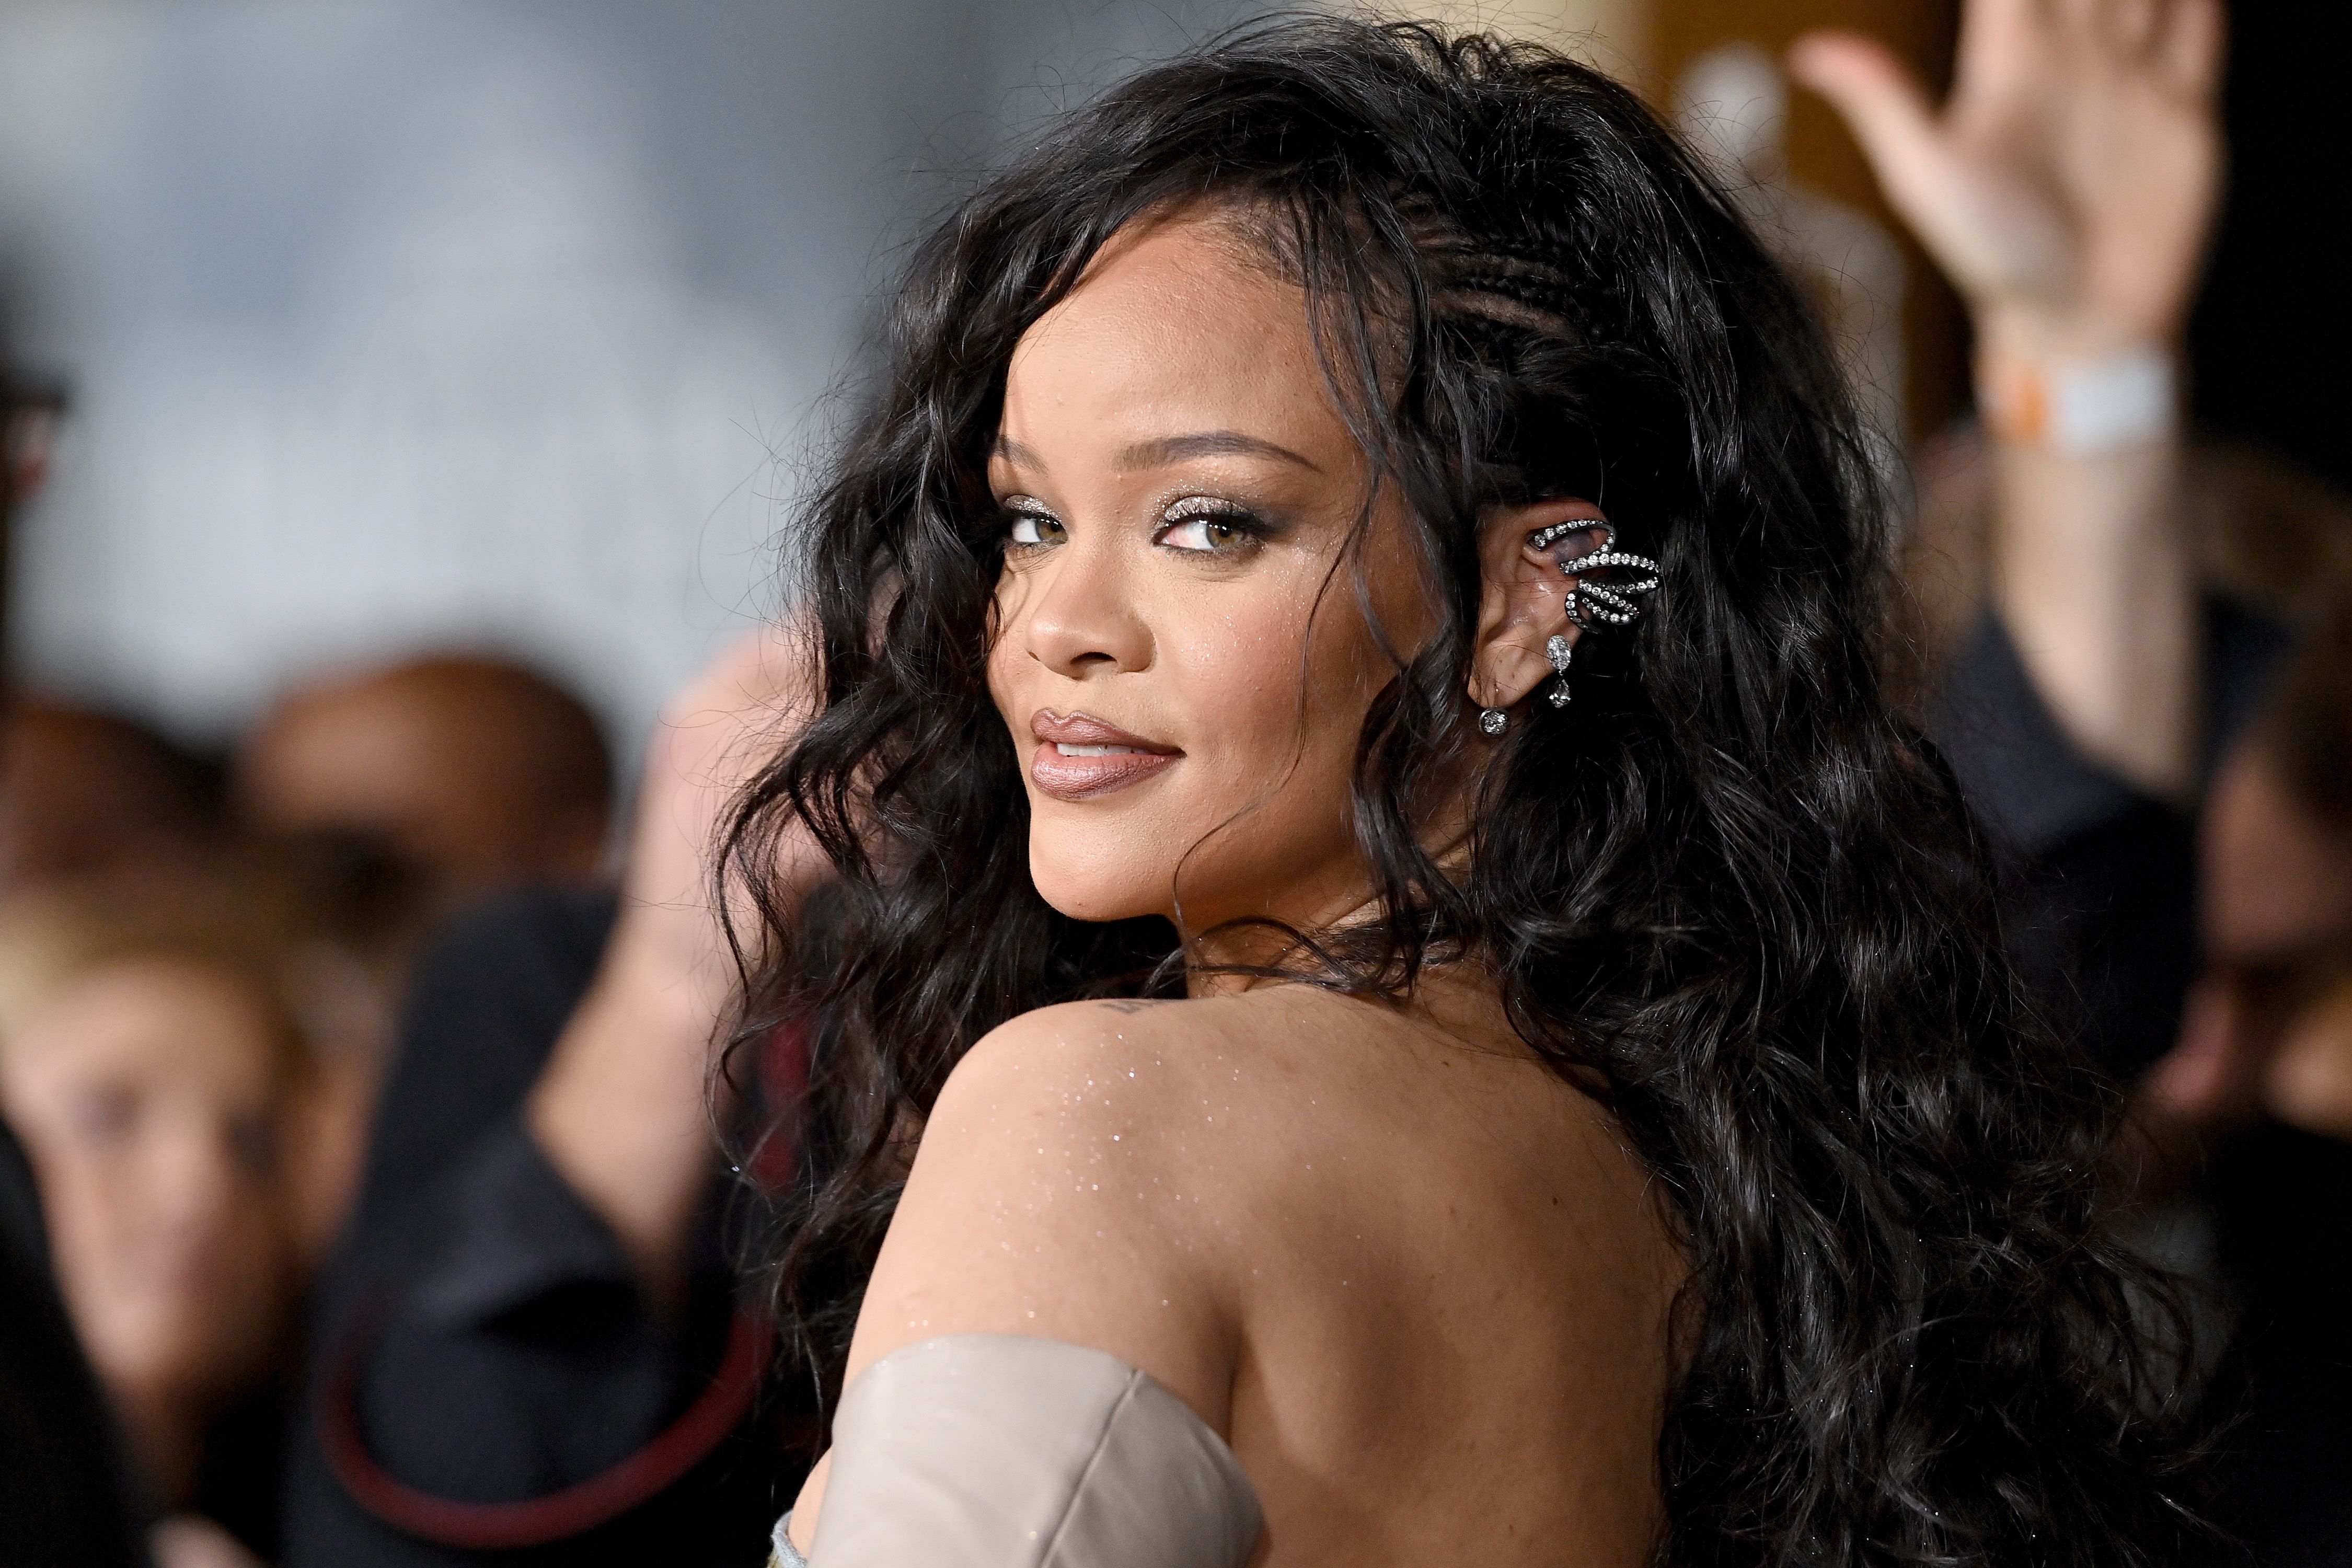 Rihanna Flaunts Butt In Thong Lingerie In Savage x Fenty IG image